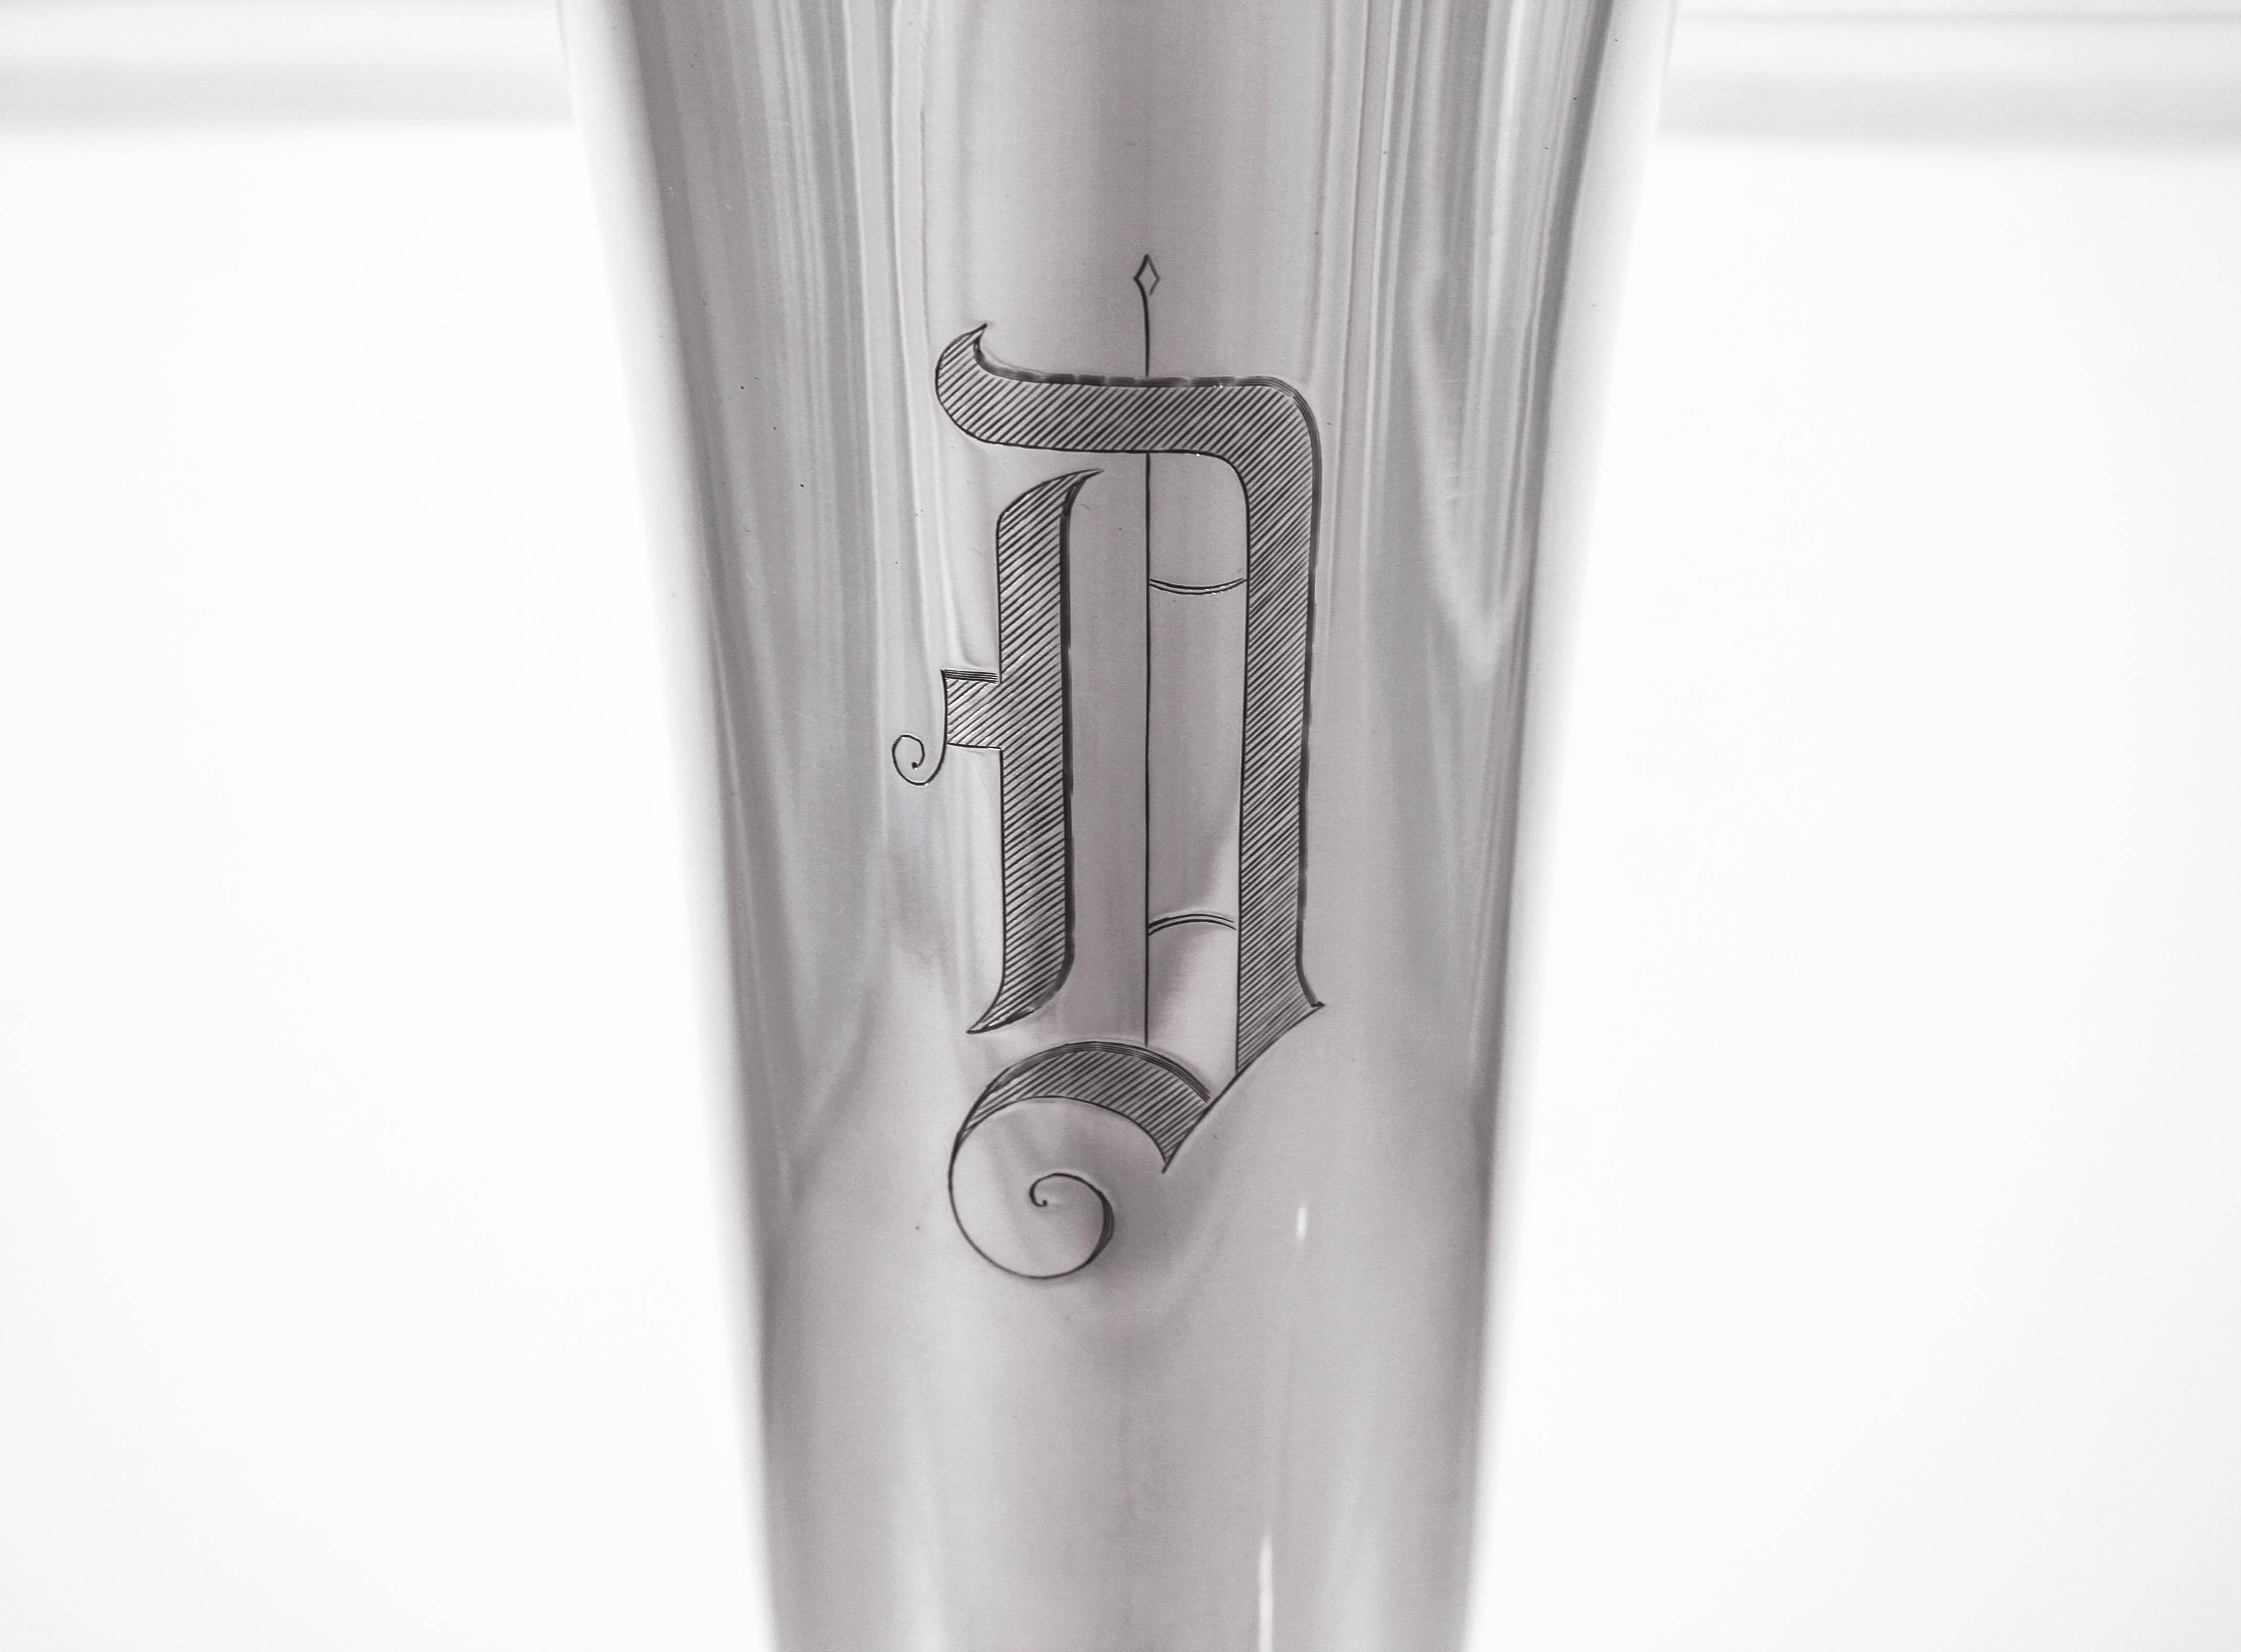 We proudly offer this sterling silver vase by the Shreve Sterling Company of San Francisco, California. It has a fluted rim and an Uber-clean minimalist look. There’s a hand engraved D in the Old English font. It has a curvy shape that’s feminine